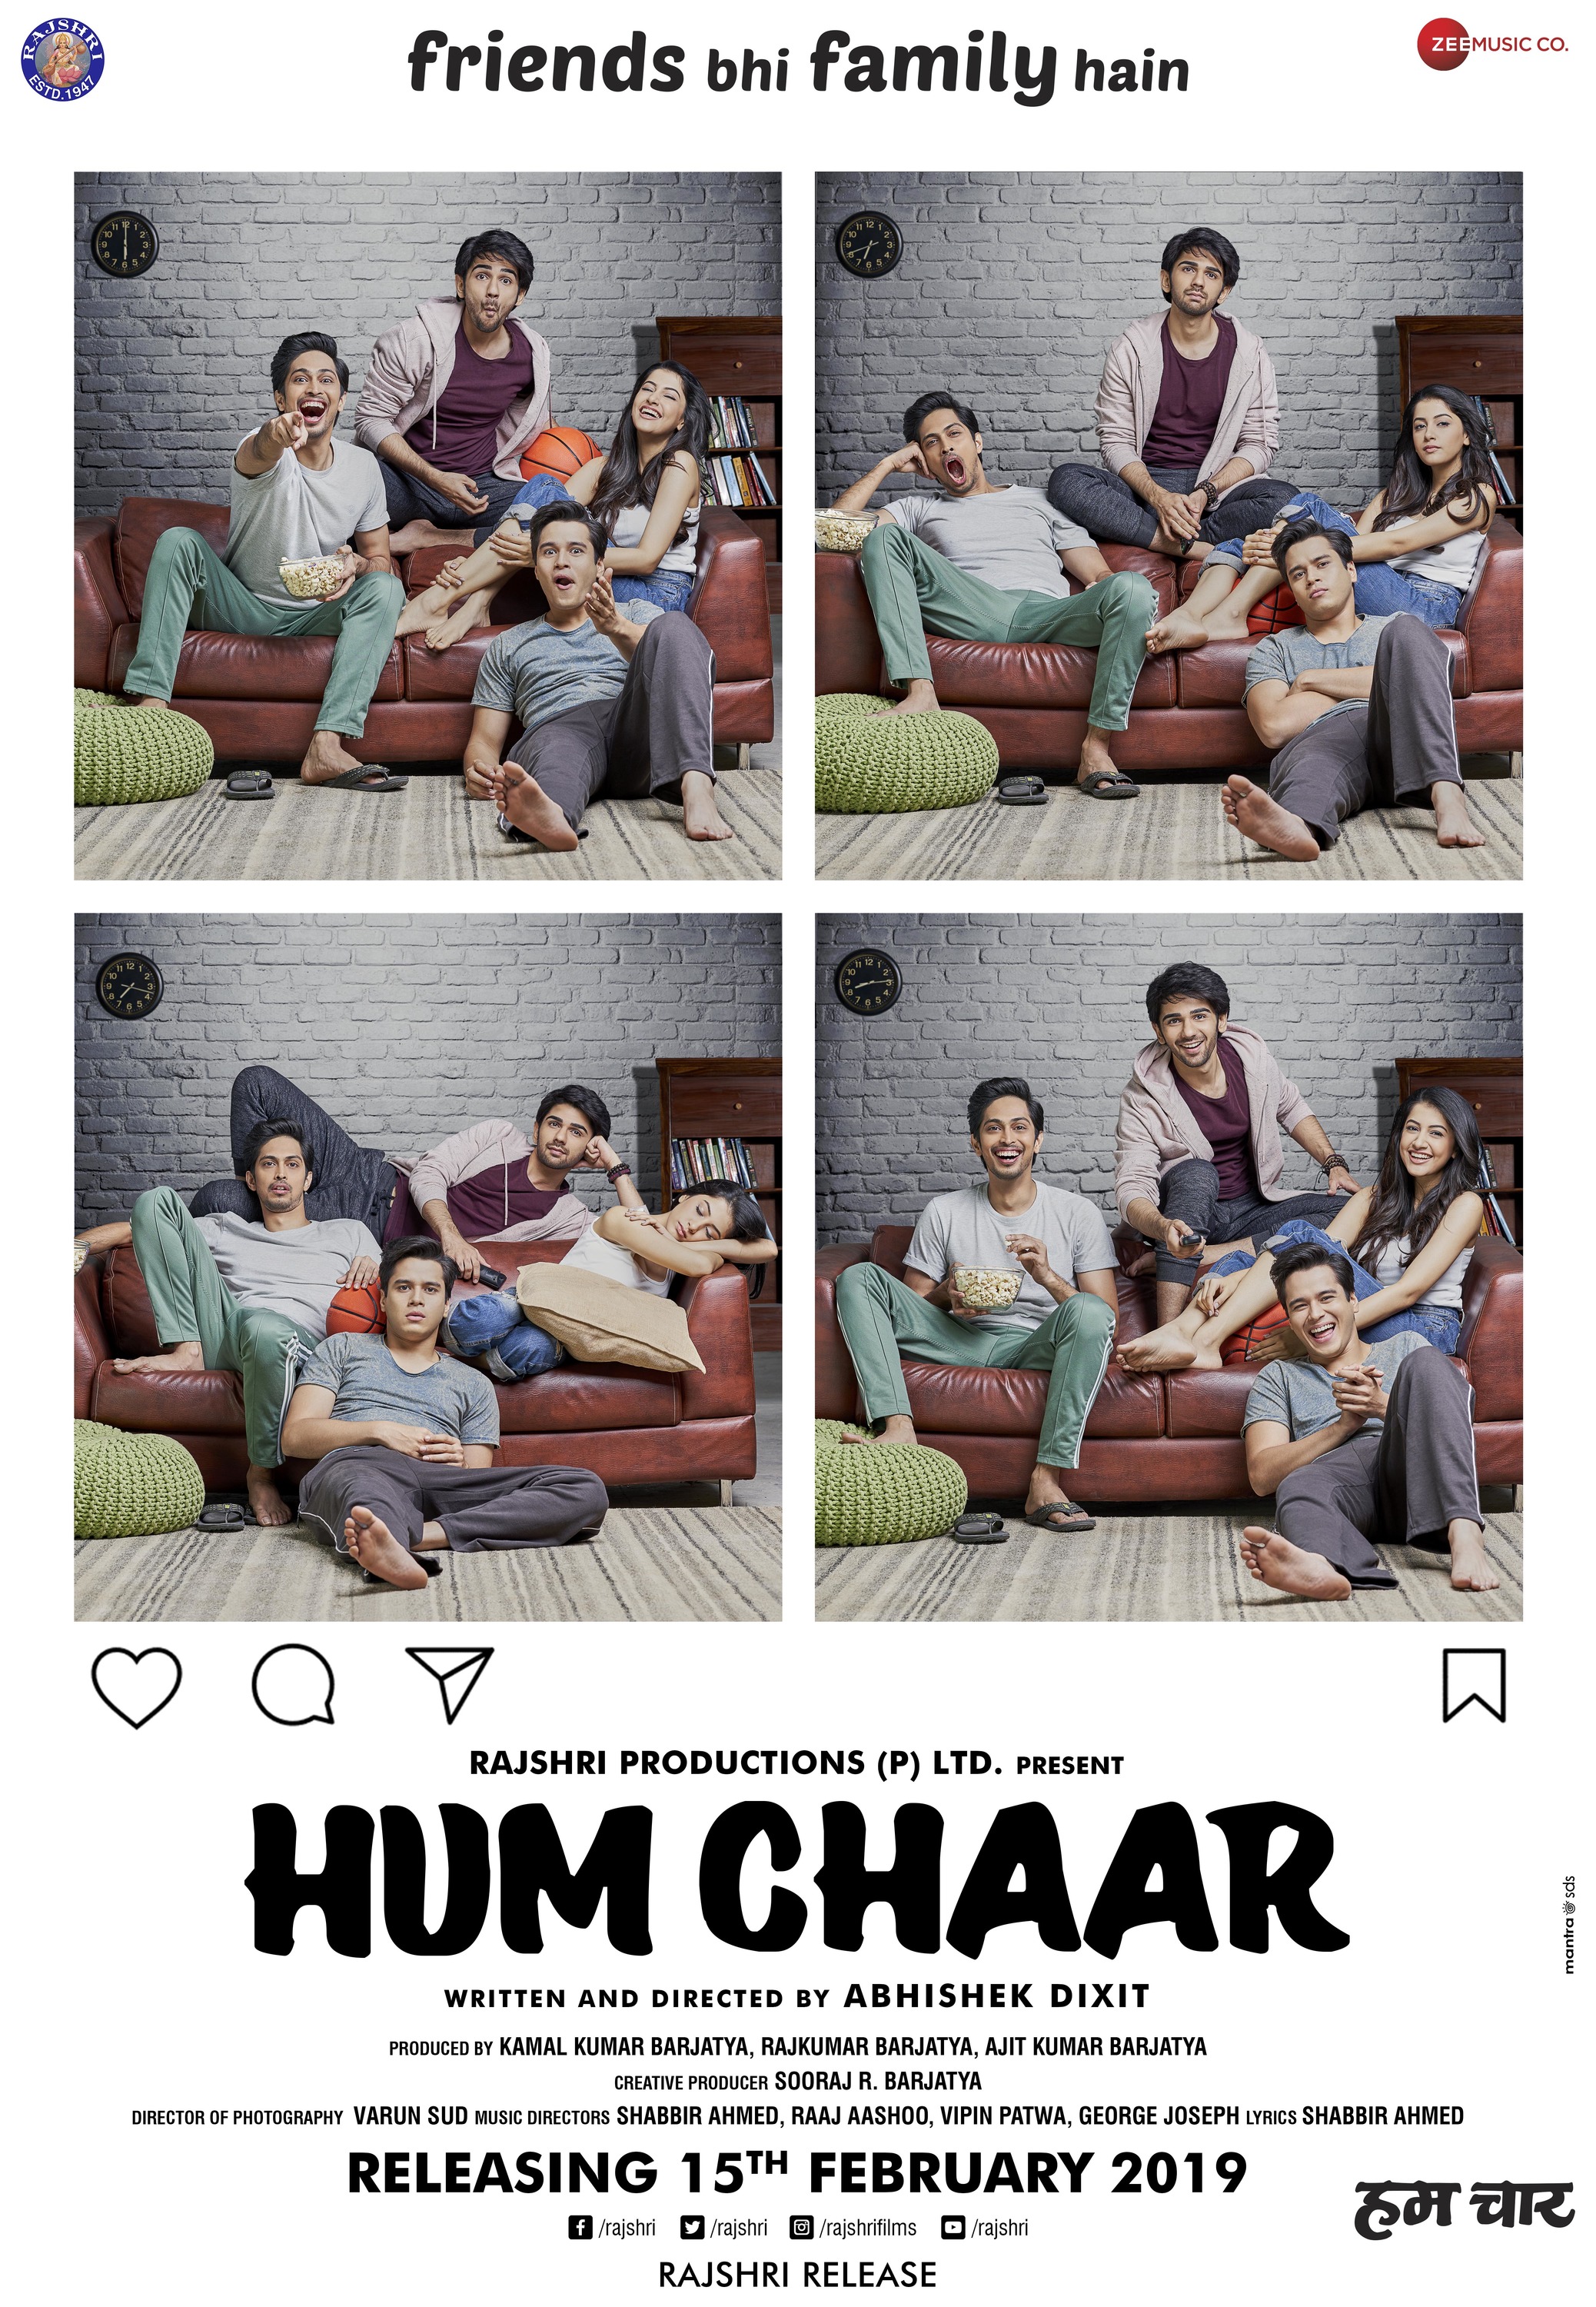 Mega Sized Movie Poster Image for Hum chaar 